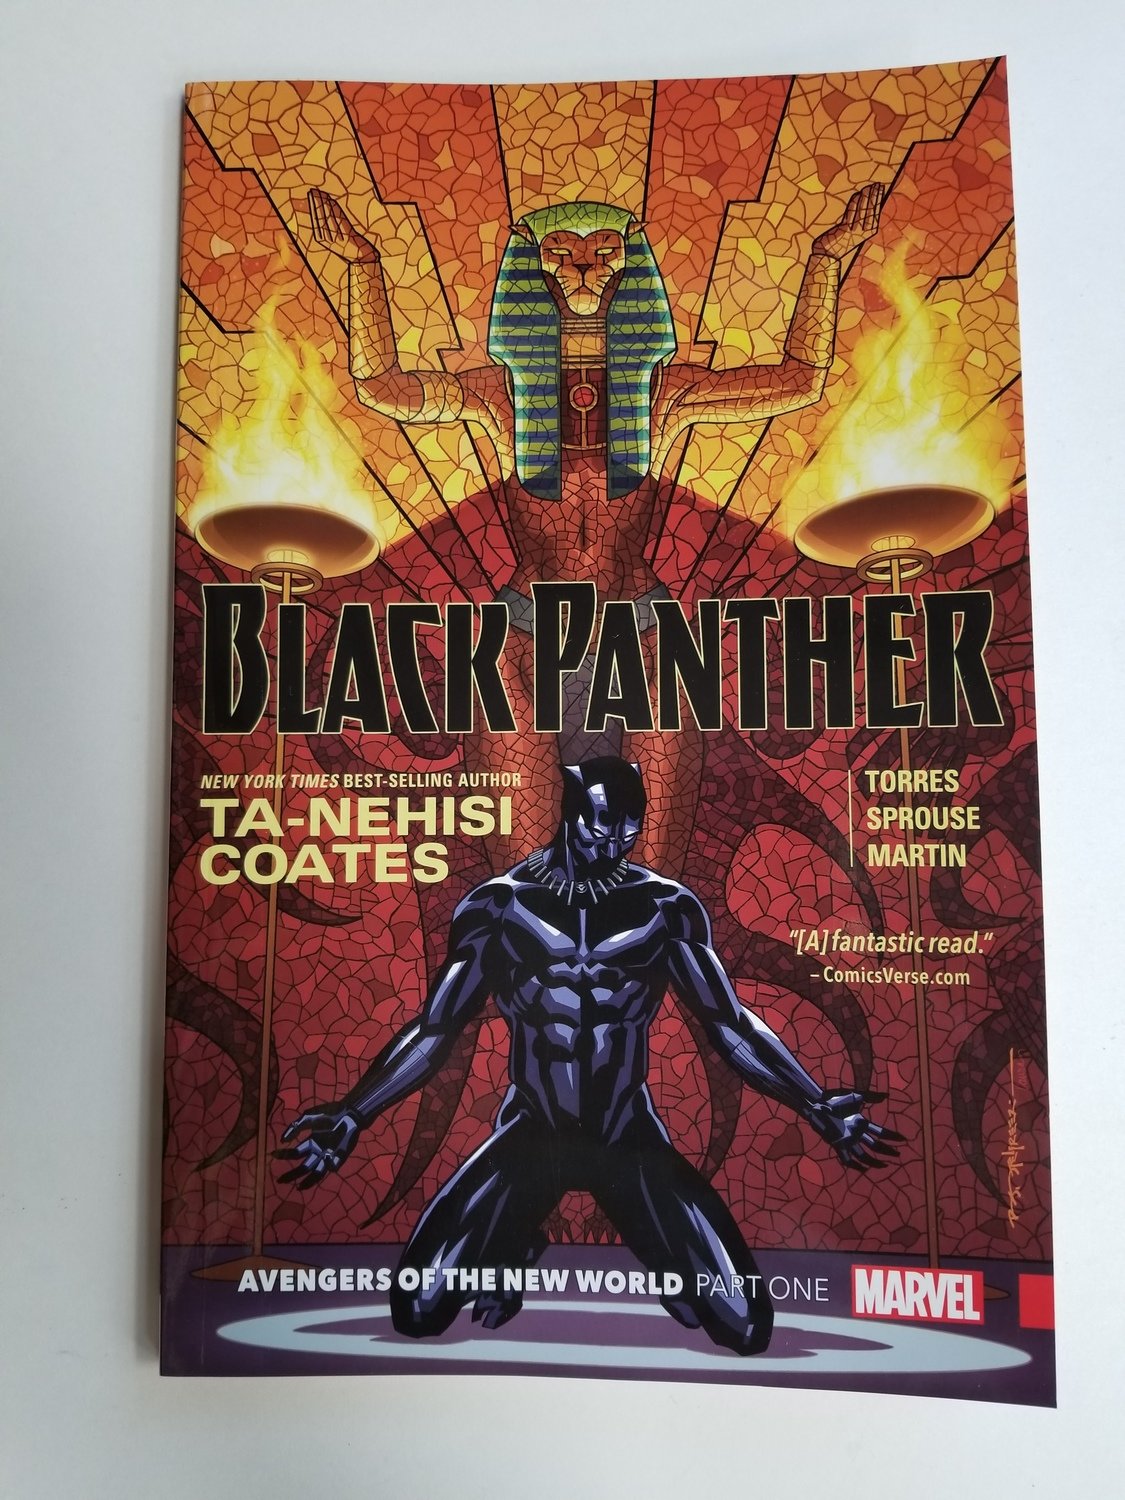 Black Panther Avengers of the New World